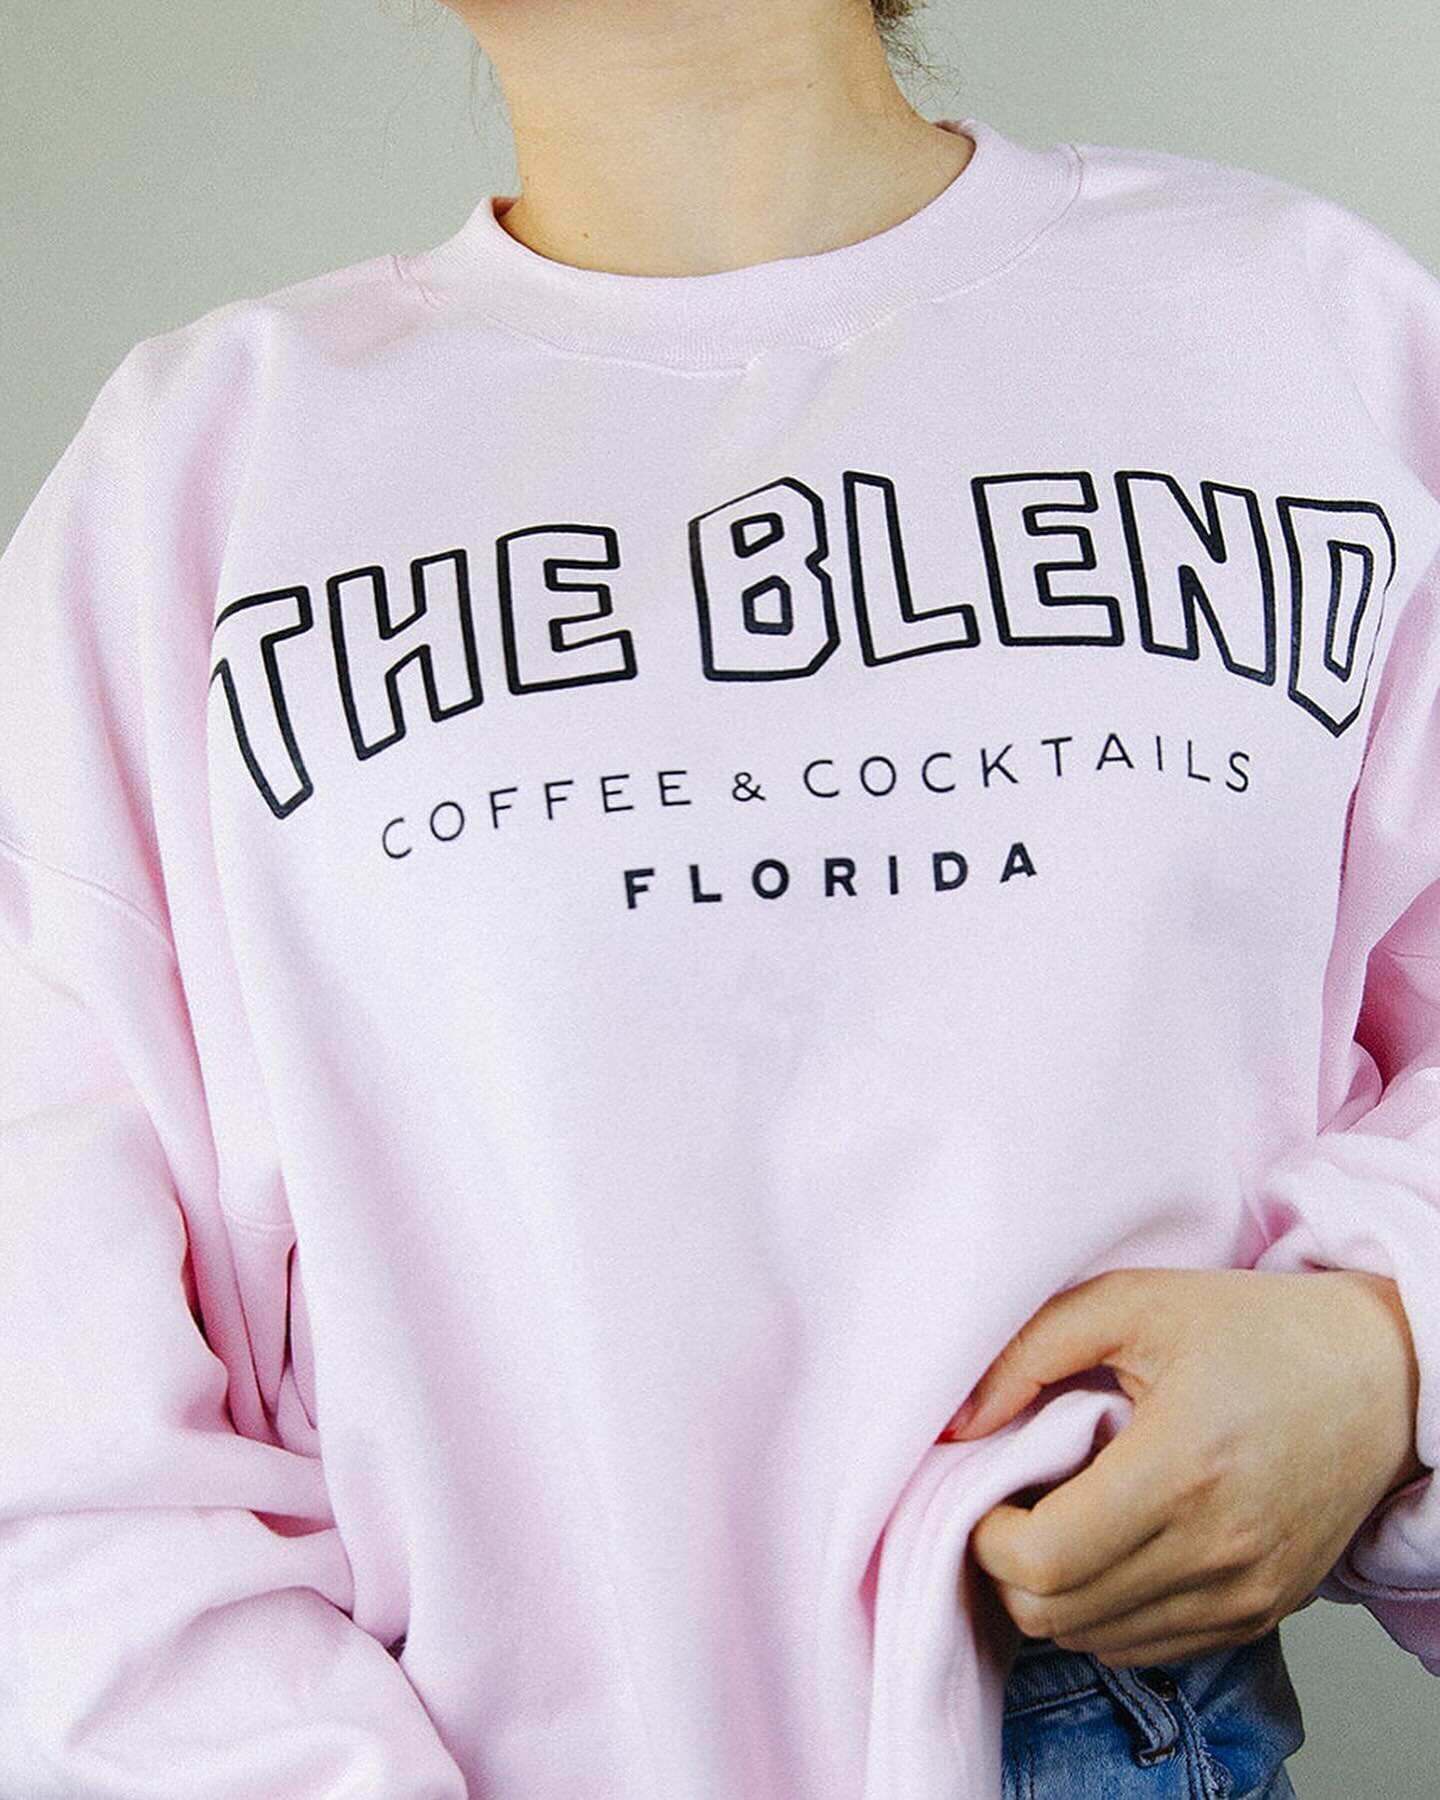 While we make your coffee check out our merch🤩 We have something for everyone&hellip; even our furry friends🐾❤️
. 
. 
. 
#coffee #coffeelover #stpetersburg #stpetersburgflorida #stpetecoffeeshop #stpetecoffee #shoplocal #dtsp #theburg #theblend #vs